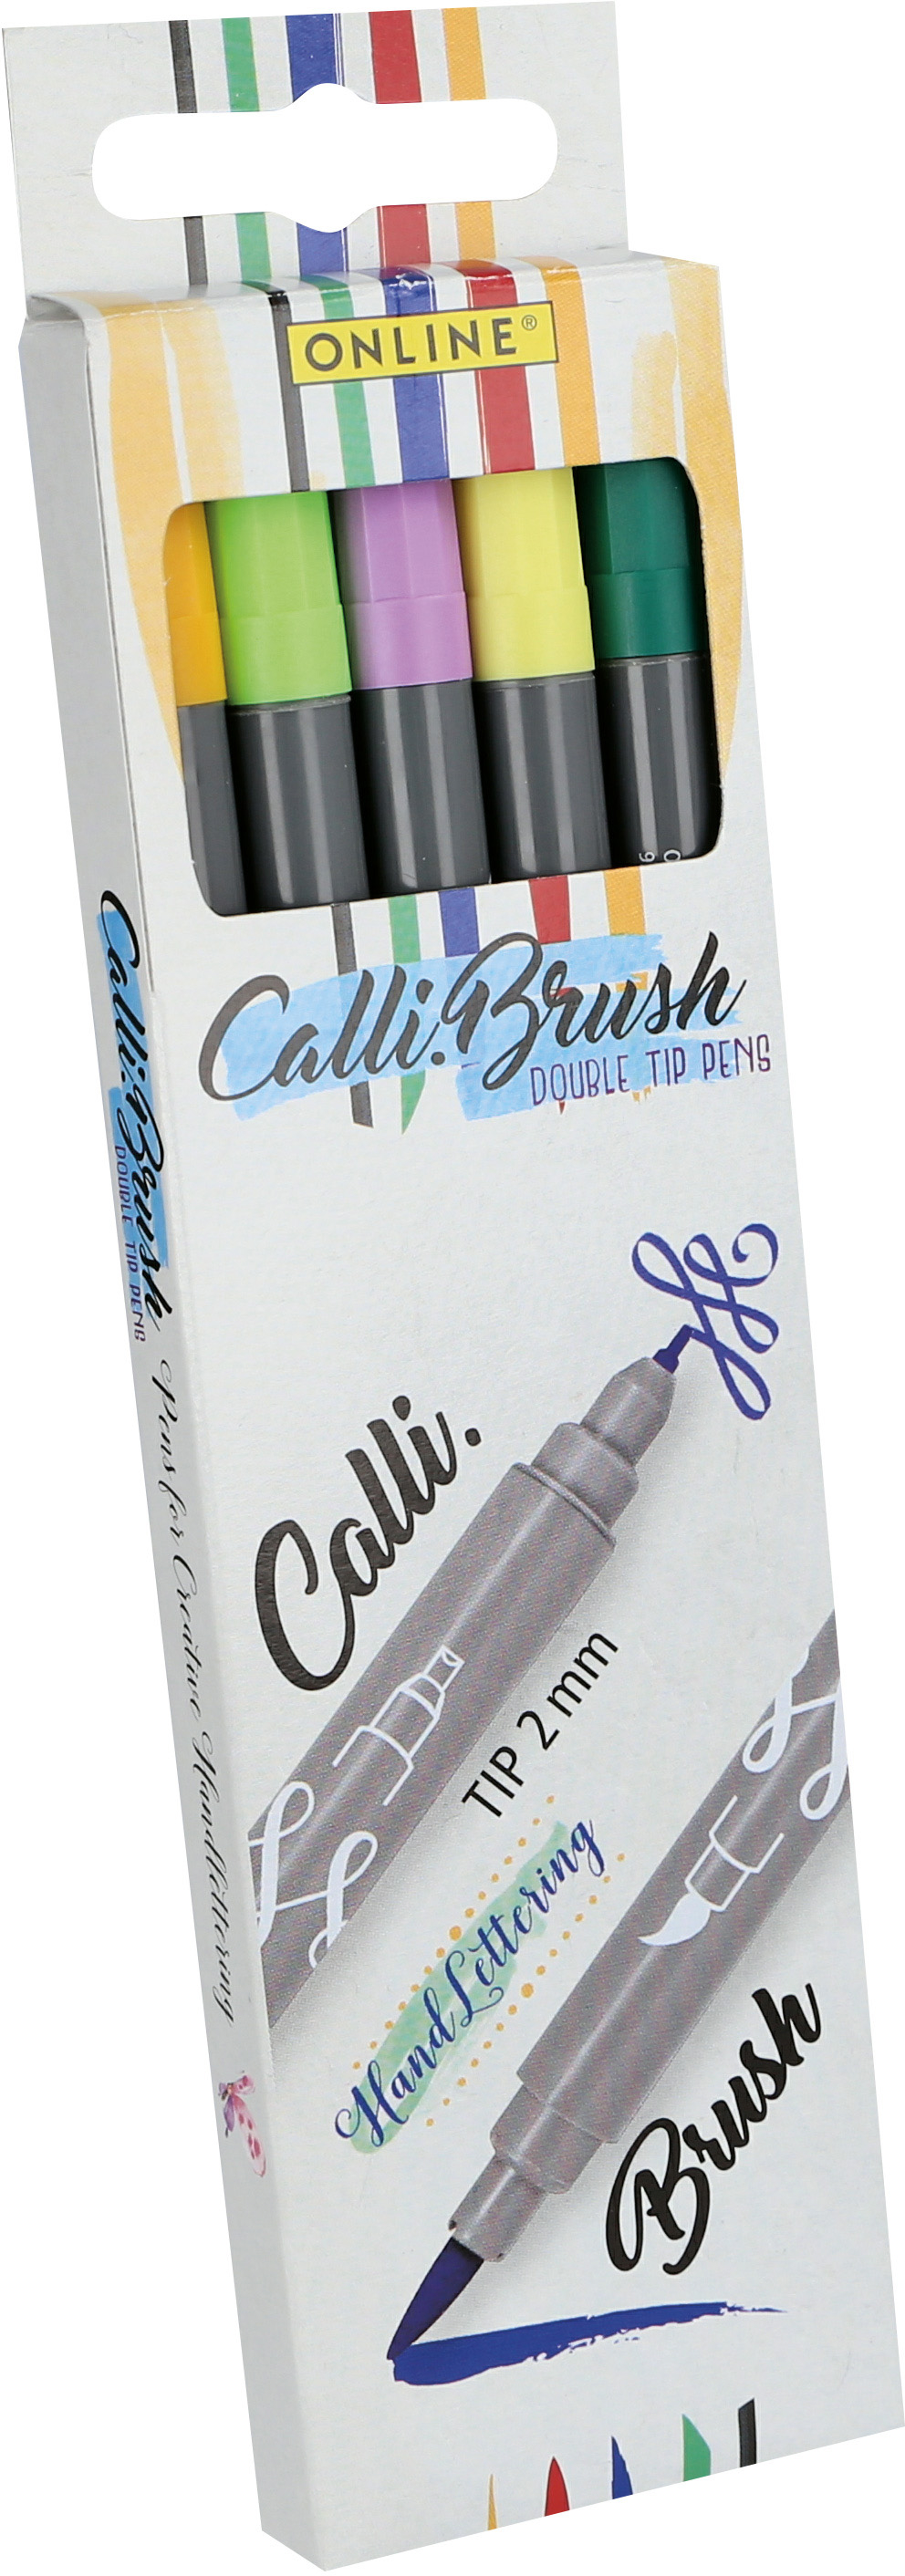 ONLINE Calli Brush Spring Edition 19134 5 couleurs Double Tip, 2mm 5 couleurs Double Tip, 2mm